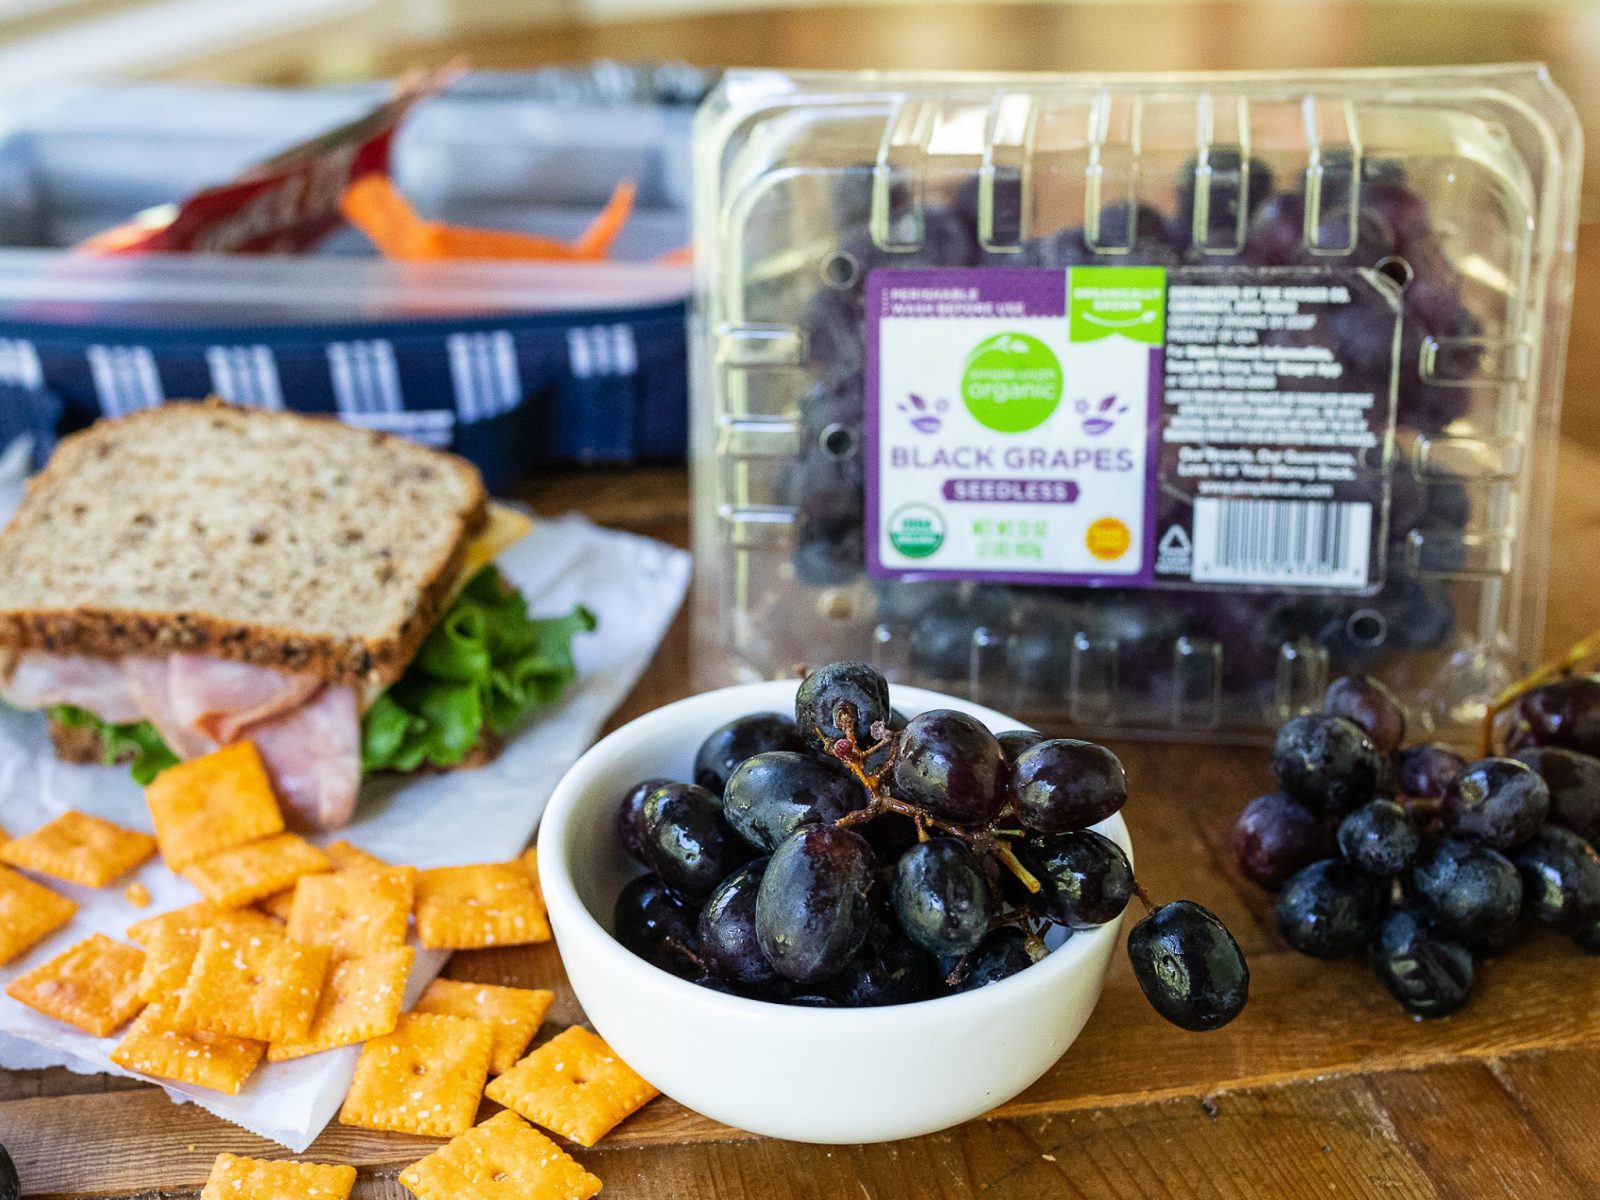 Red, White, or Black Seedless Grapes Just $3.99 Per Container At Kroger